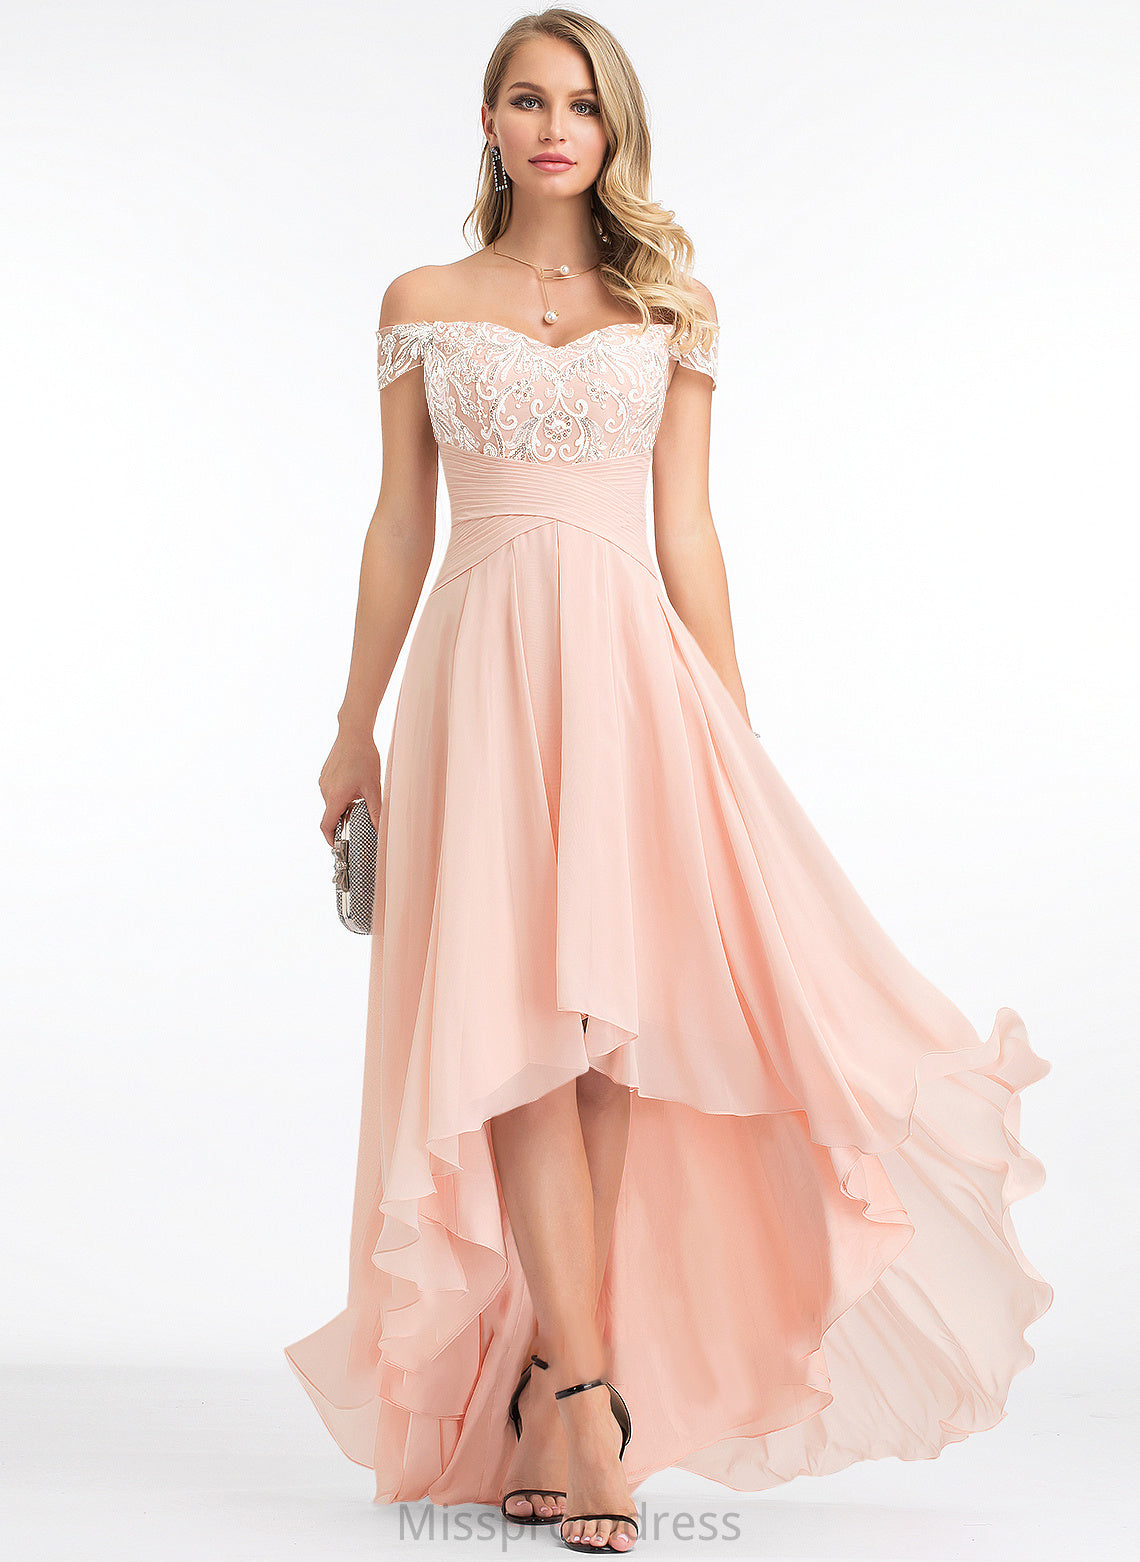 With Anya Prom Dresses Chiffon Asymmetrical A-Line Sequins Off-the-Shoulder